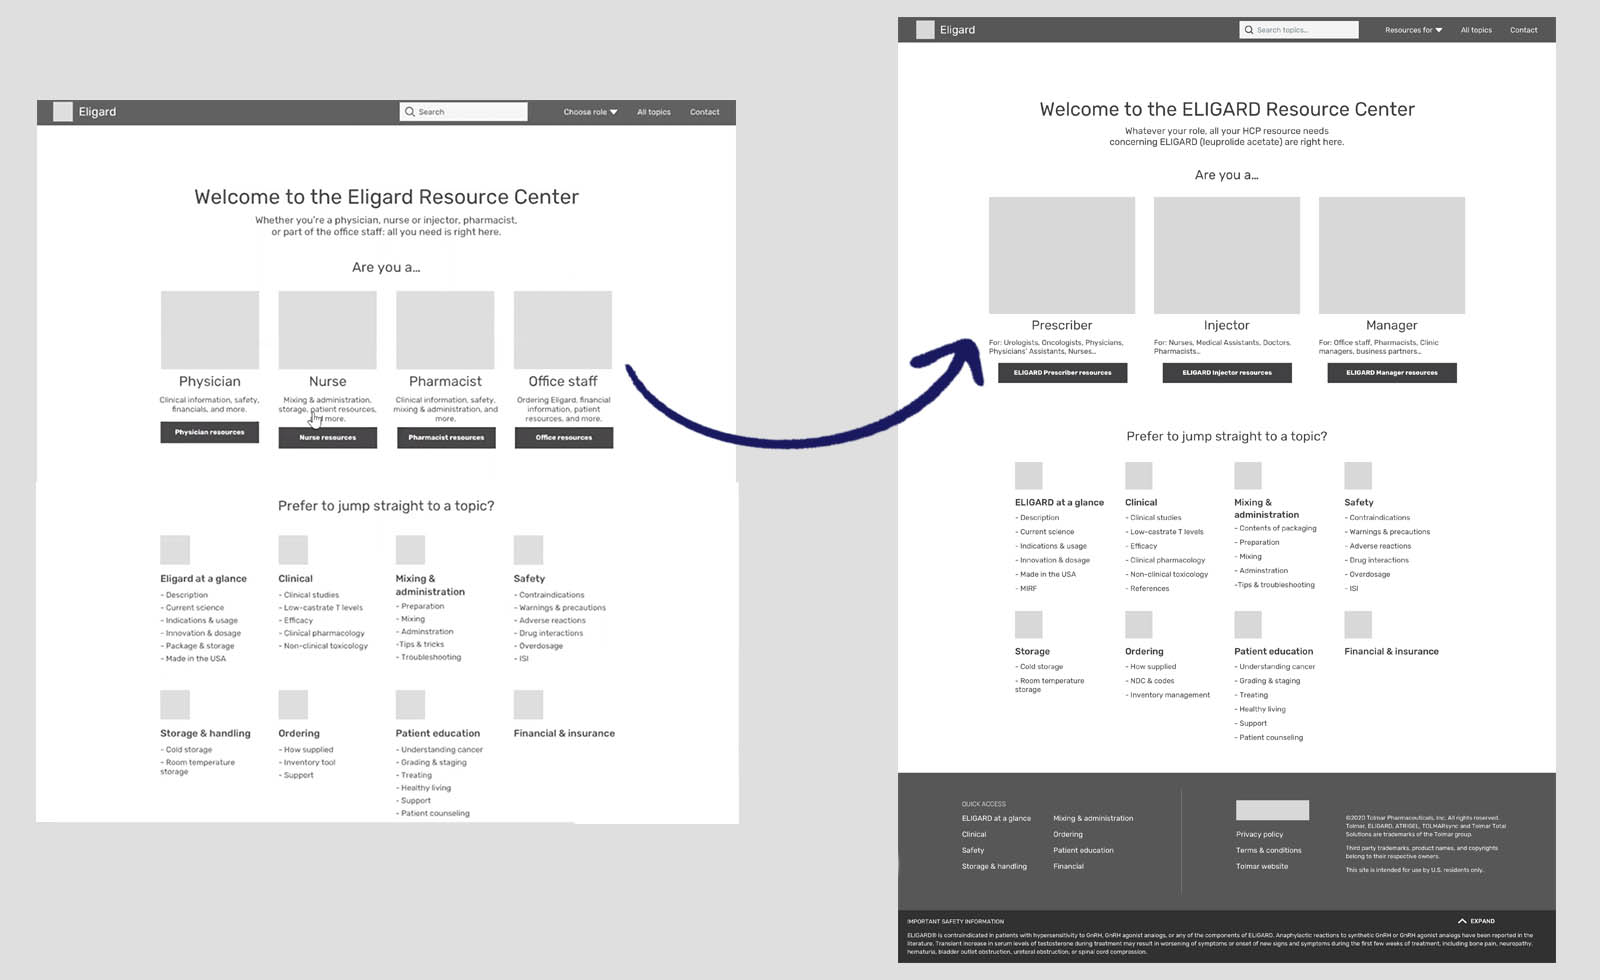 Wireframe iterations